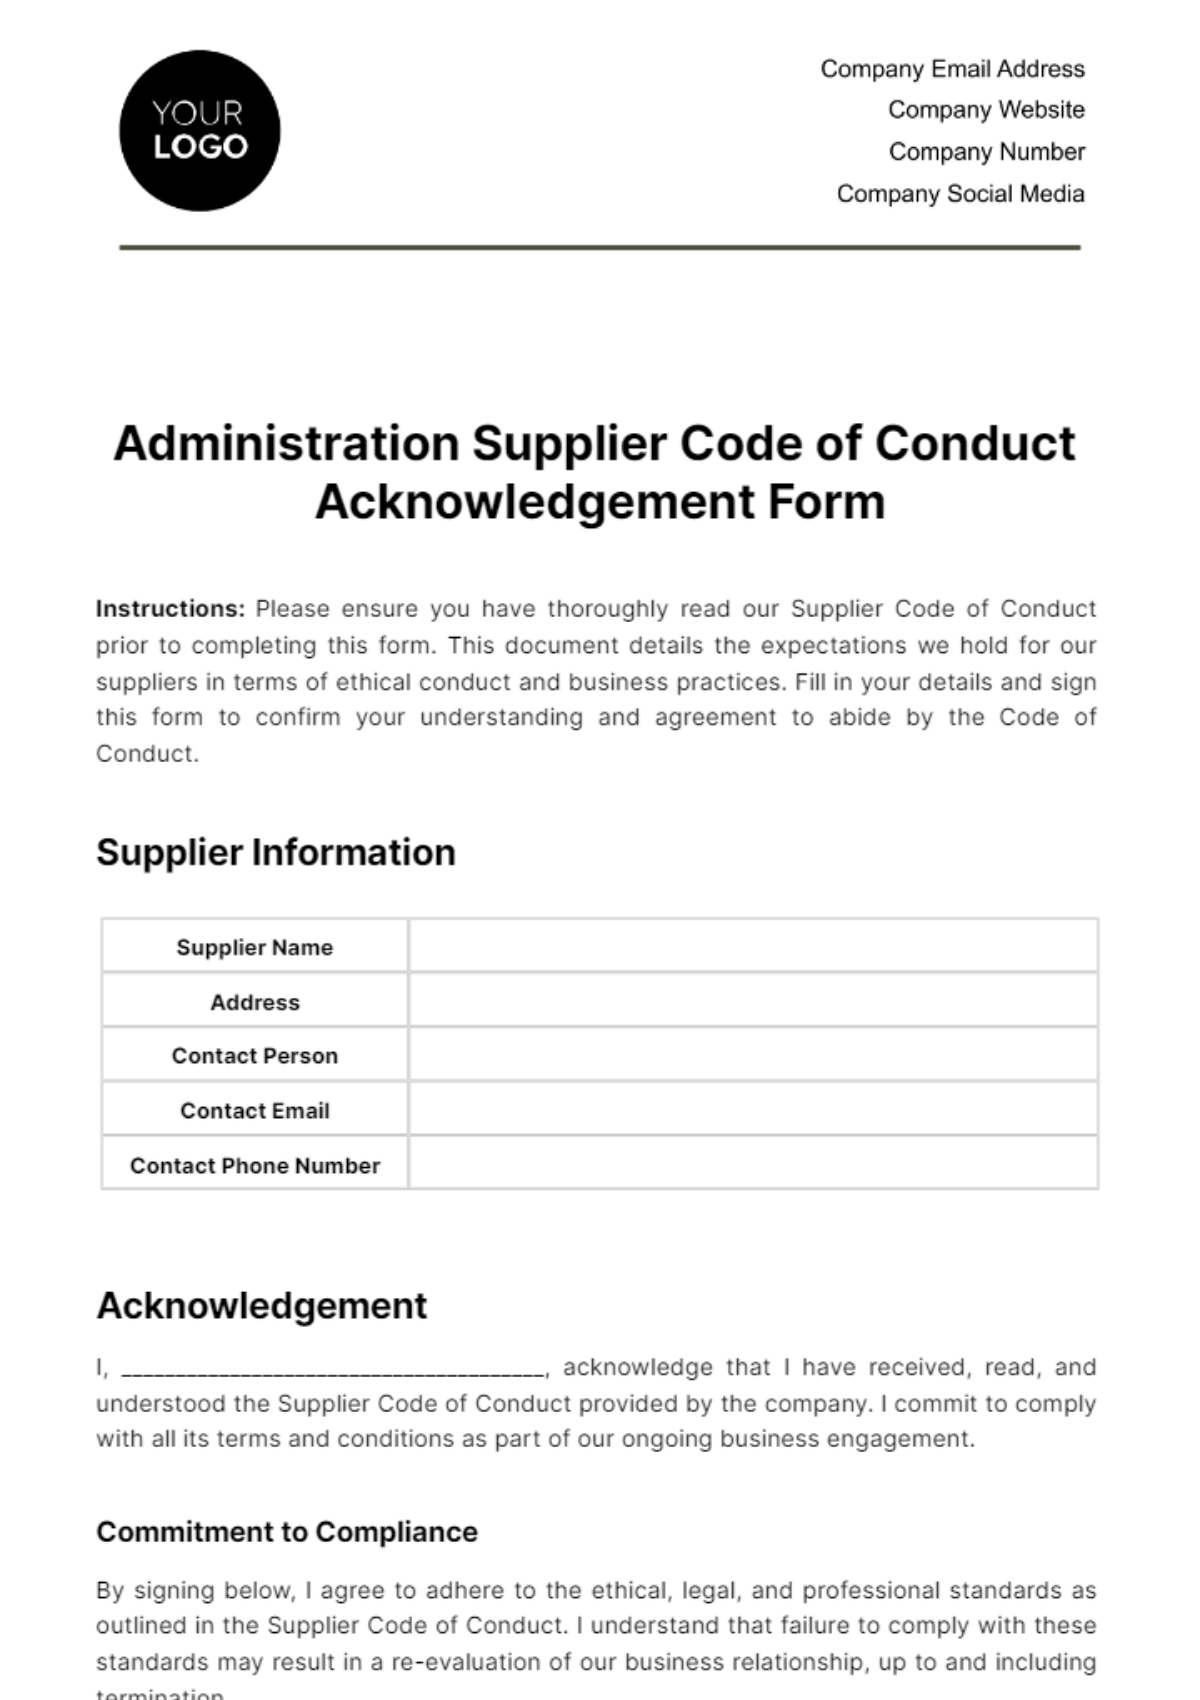 Free Administration Supplier Code of Conduct Acknowledgement Form Template